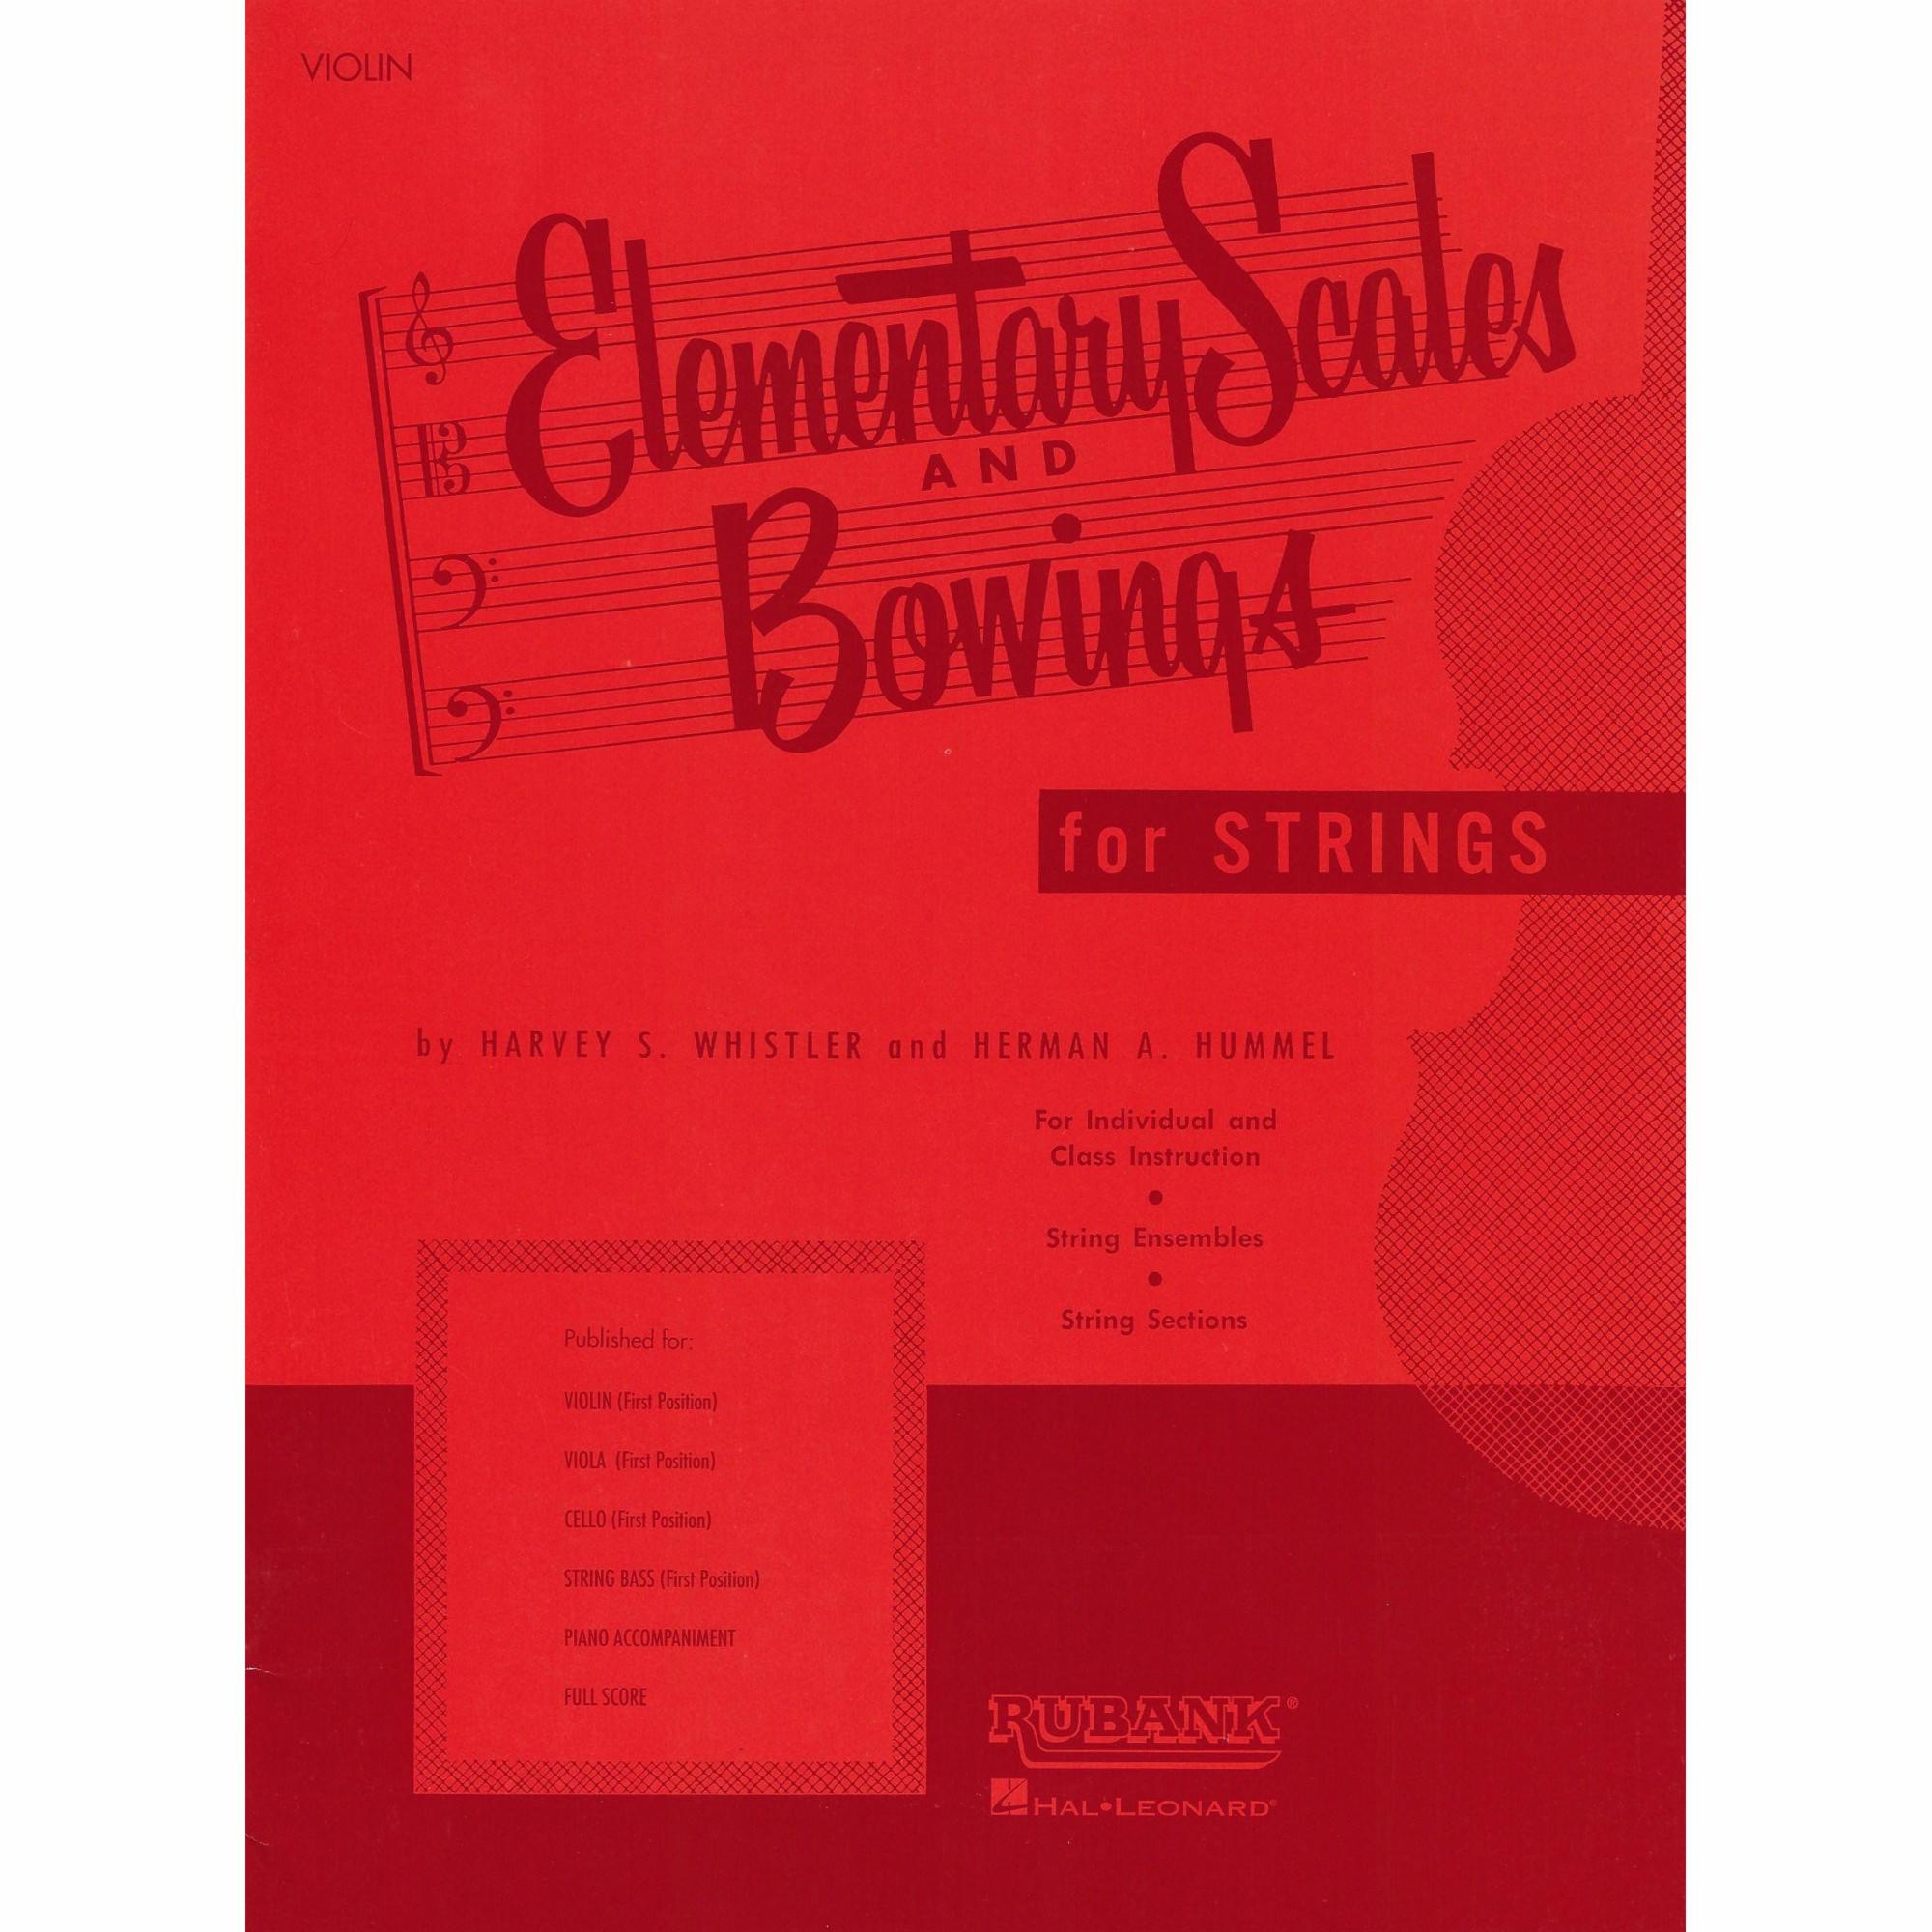 Elementary Scales and Bowings for Violin